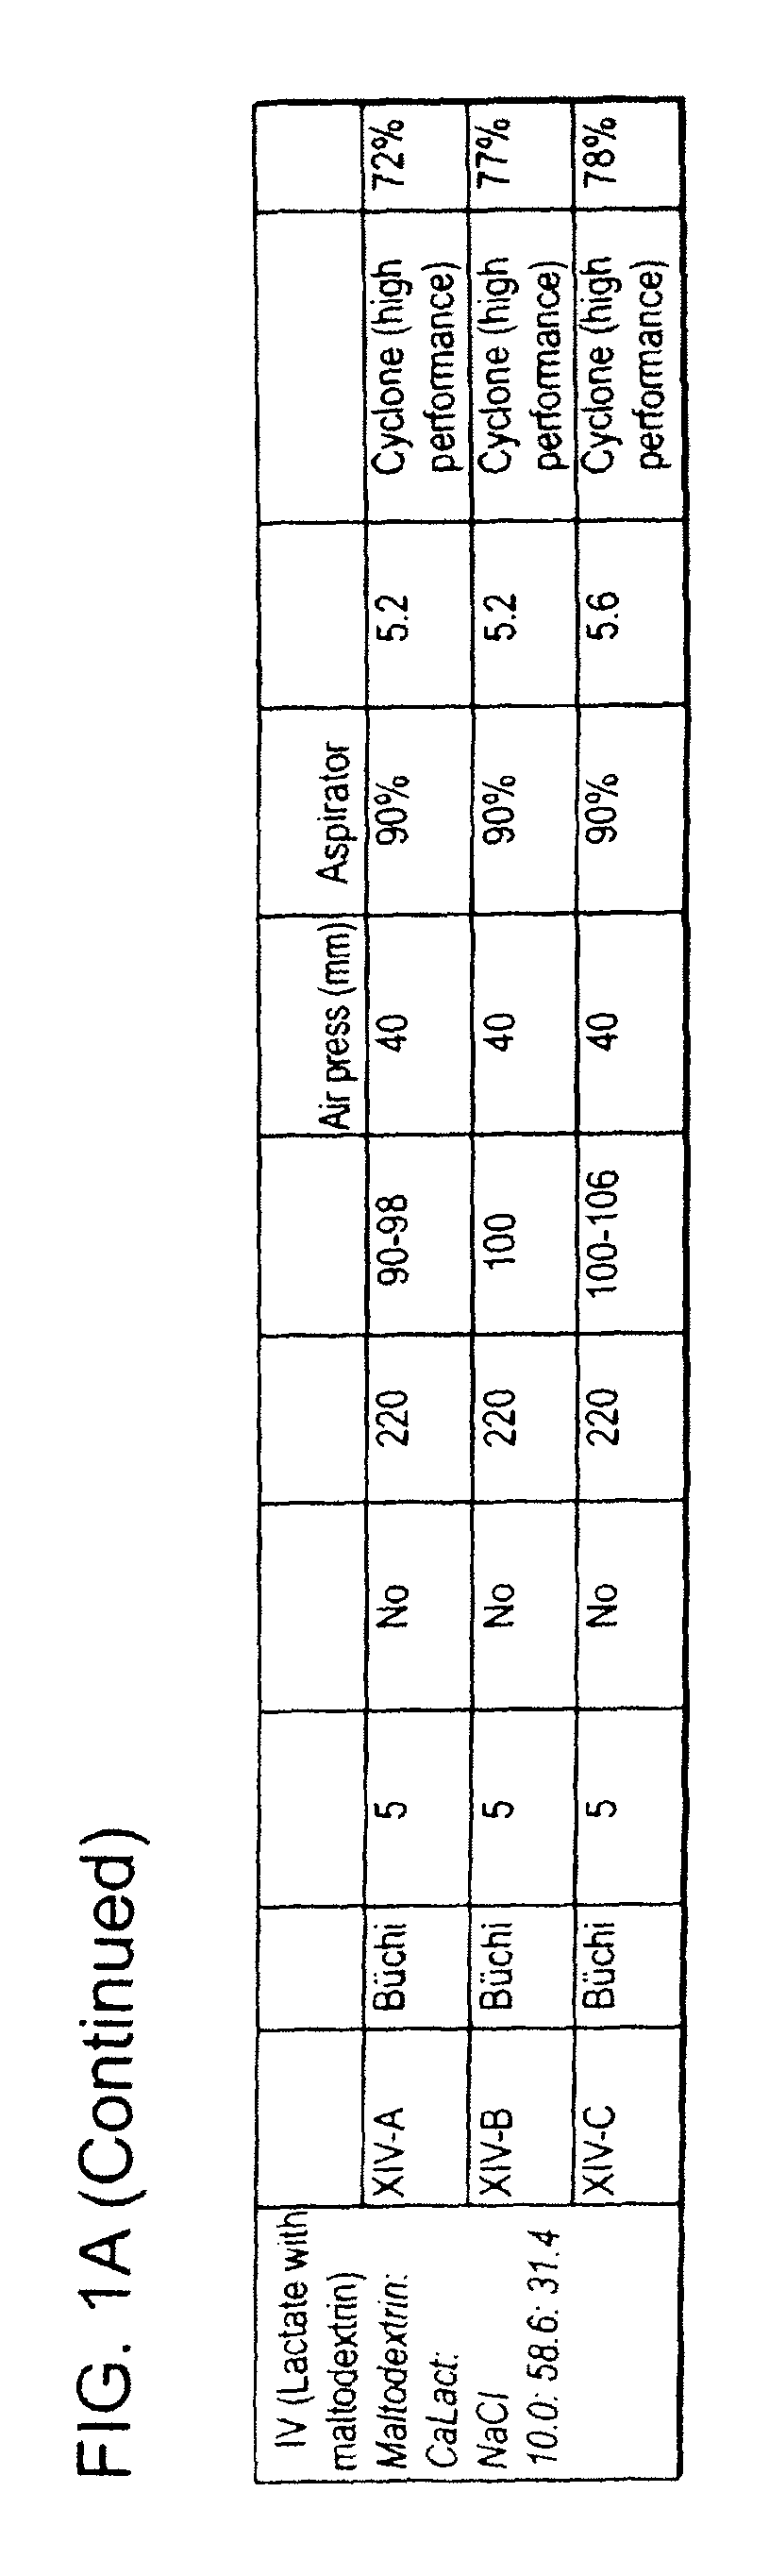 Dry powder formulations and methods for treating pulmonary diseases